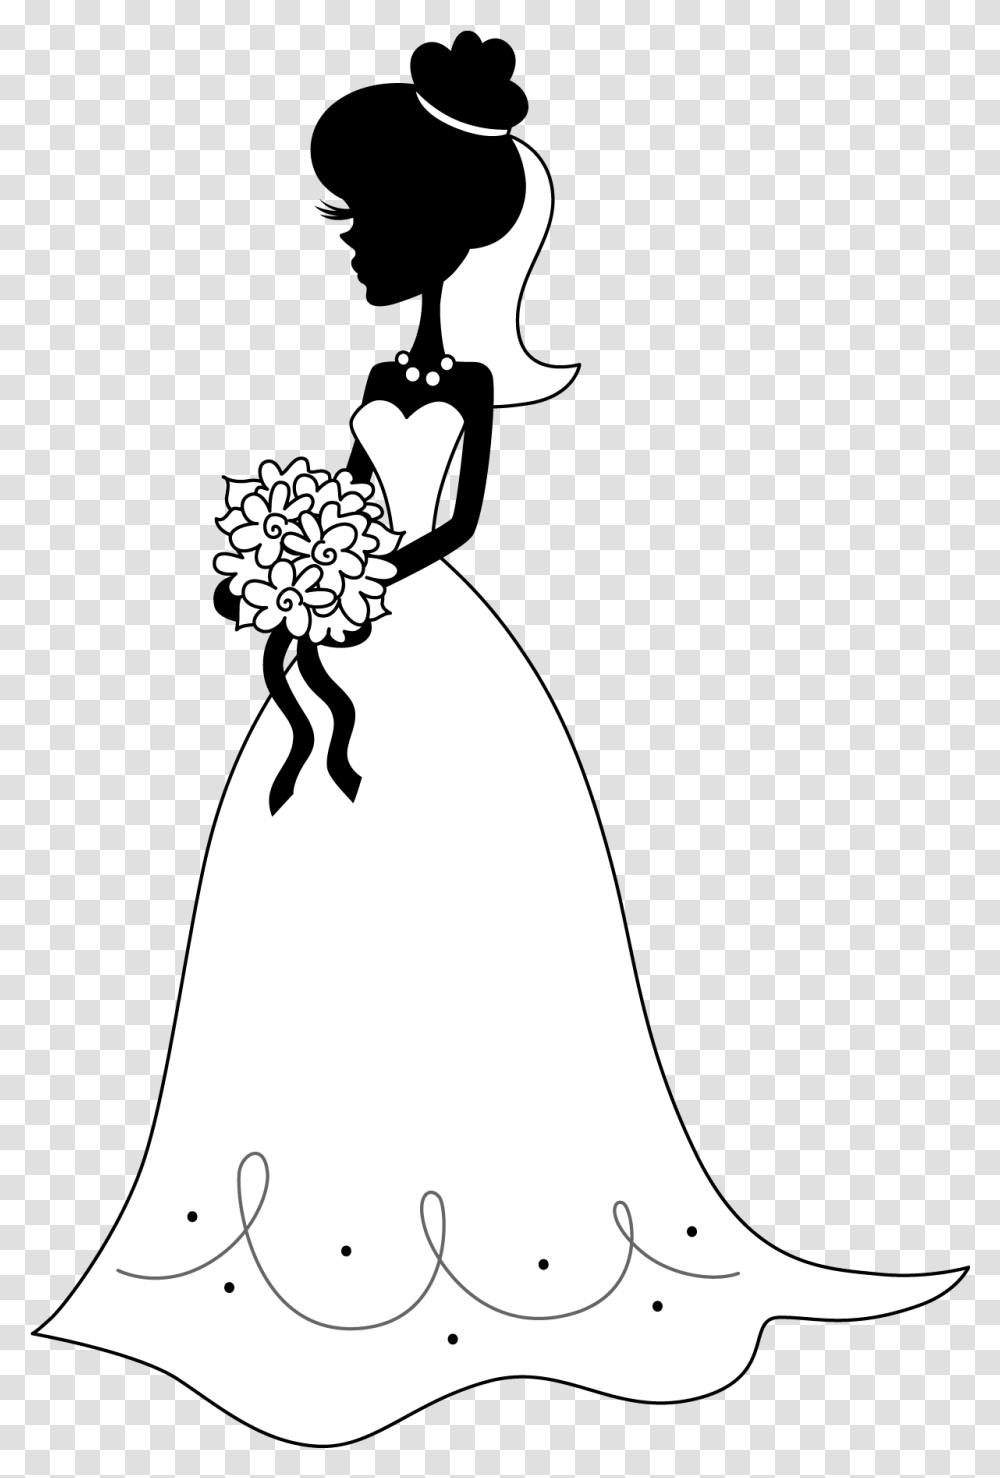 Bride Silhouette 1 Image Illustration, Clothing, Apparel, Gown, Fashion Transparent Png